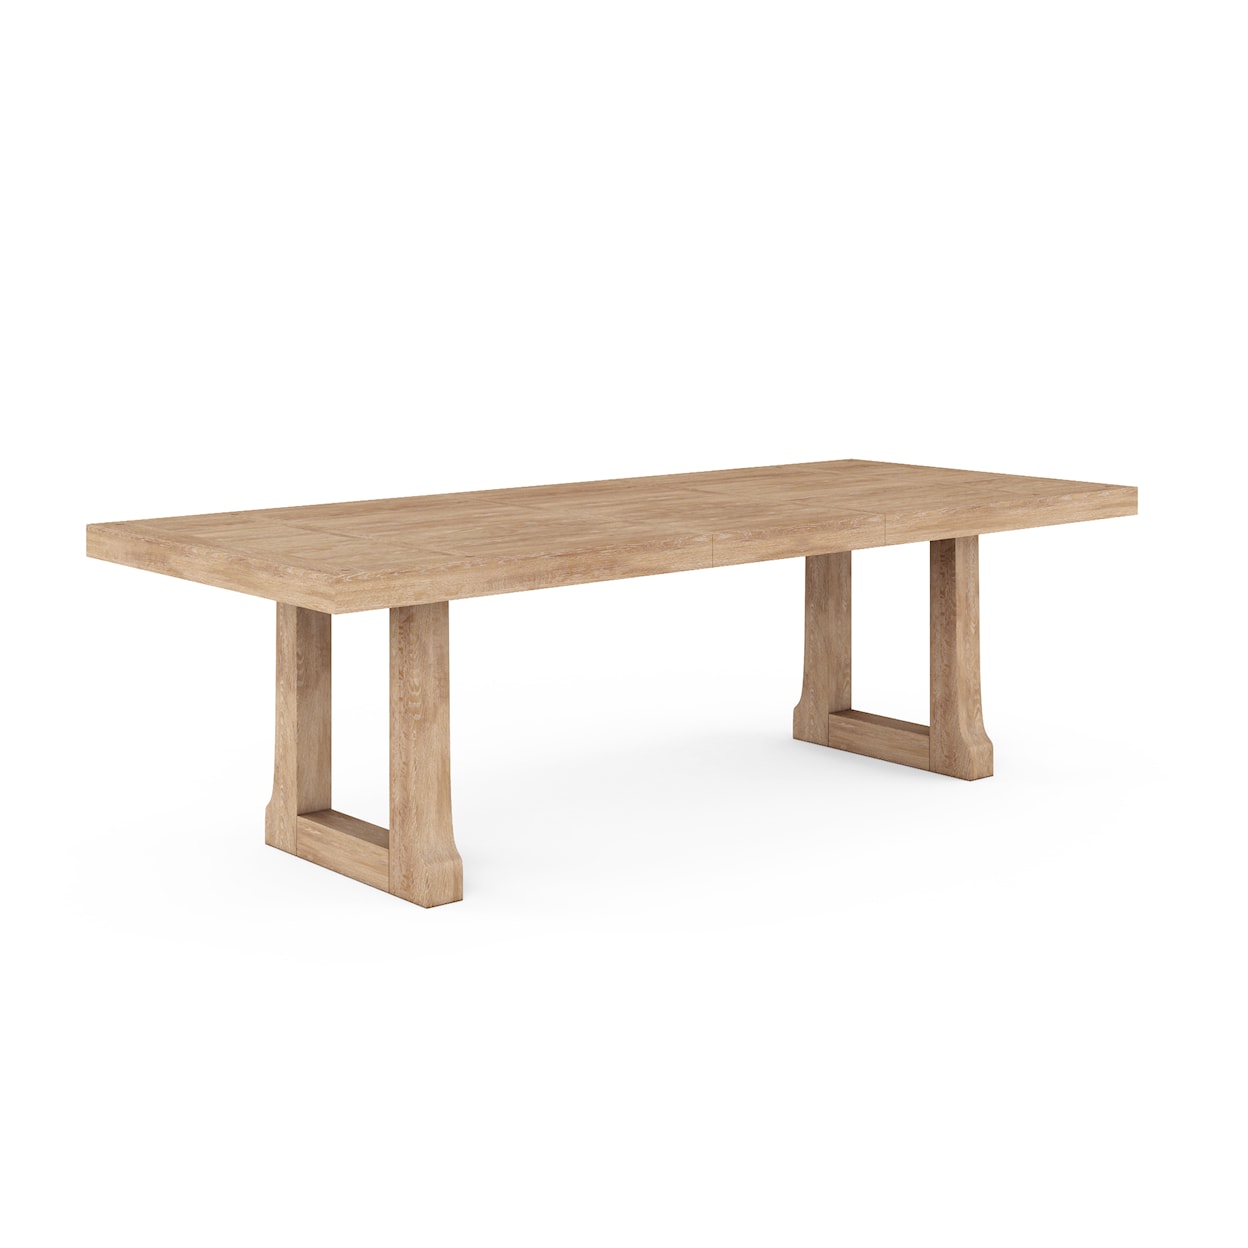 A.R.T. Furniture Inc Post Trestle Dining Table